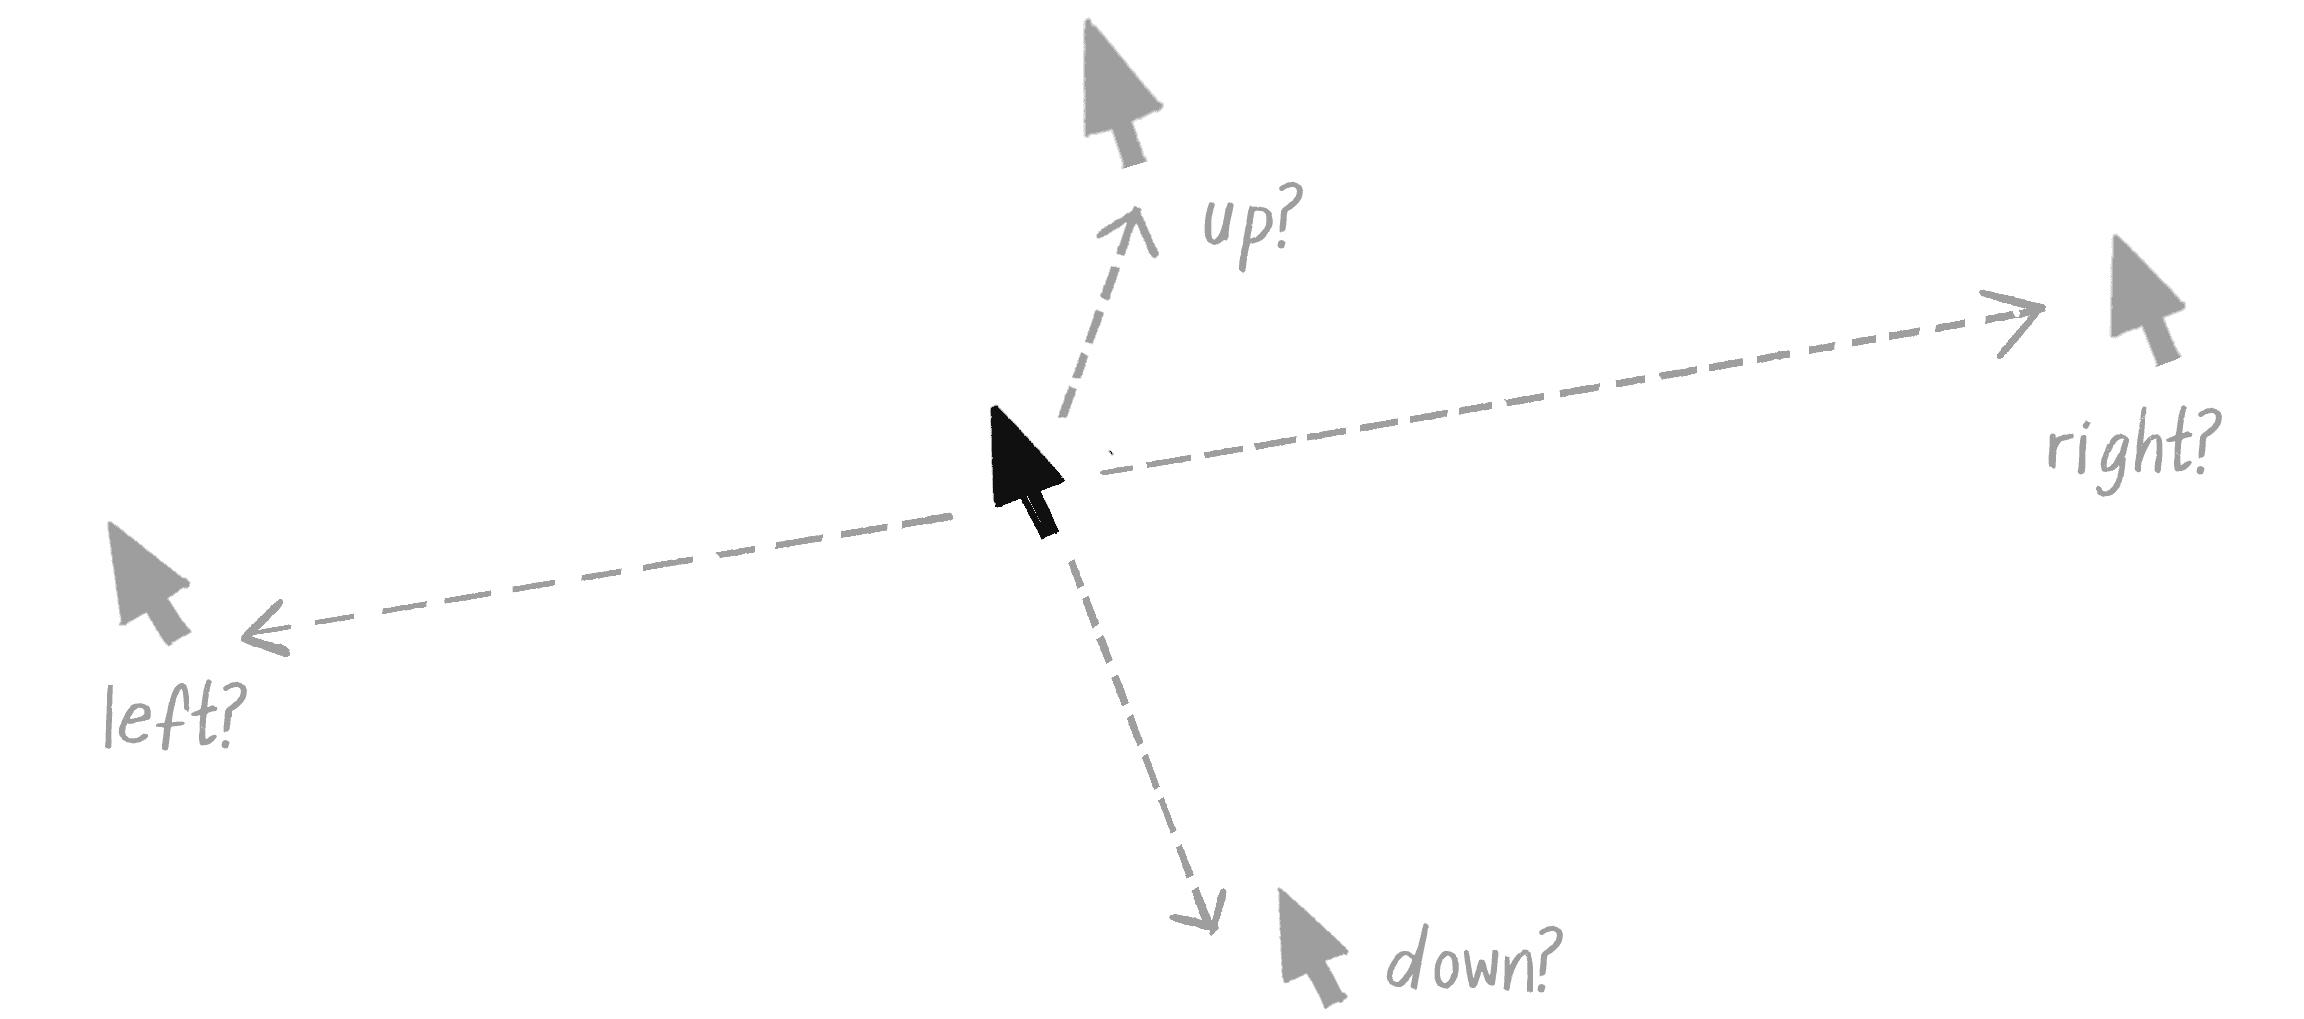 Figure 10.20: A single mouse gesture as a vector between a start and end point